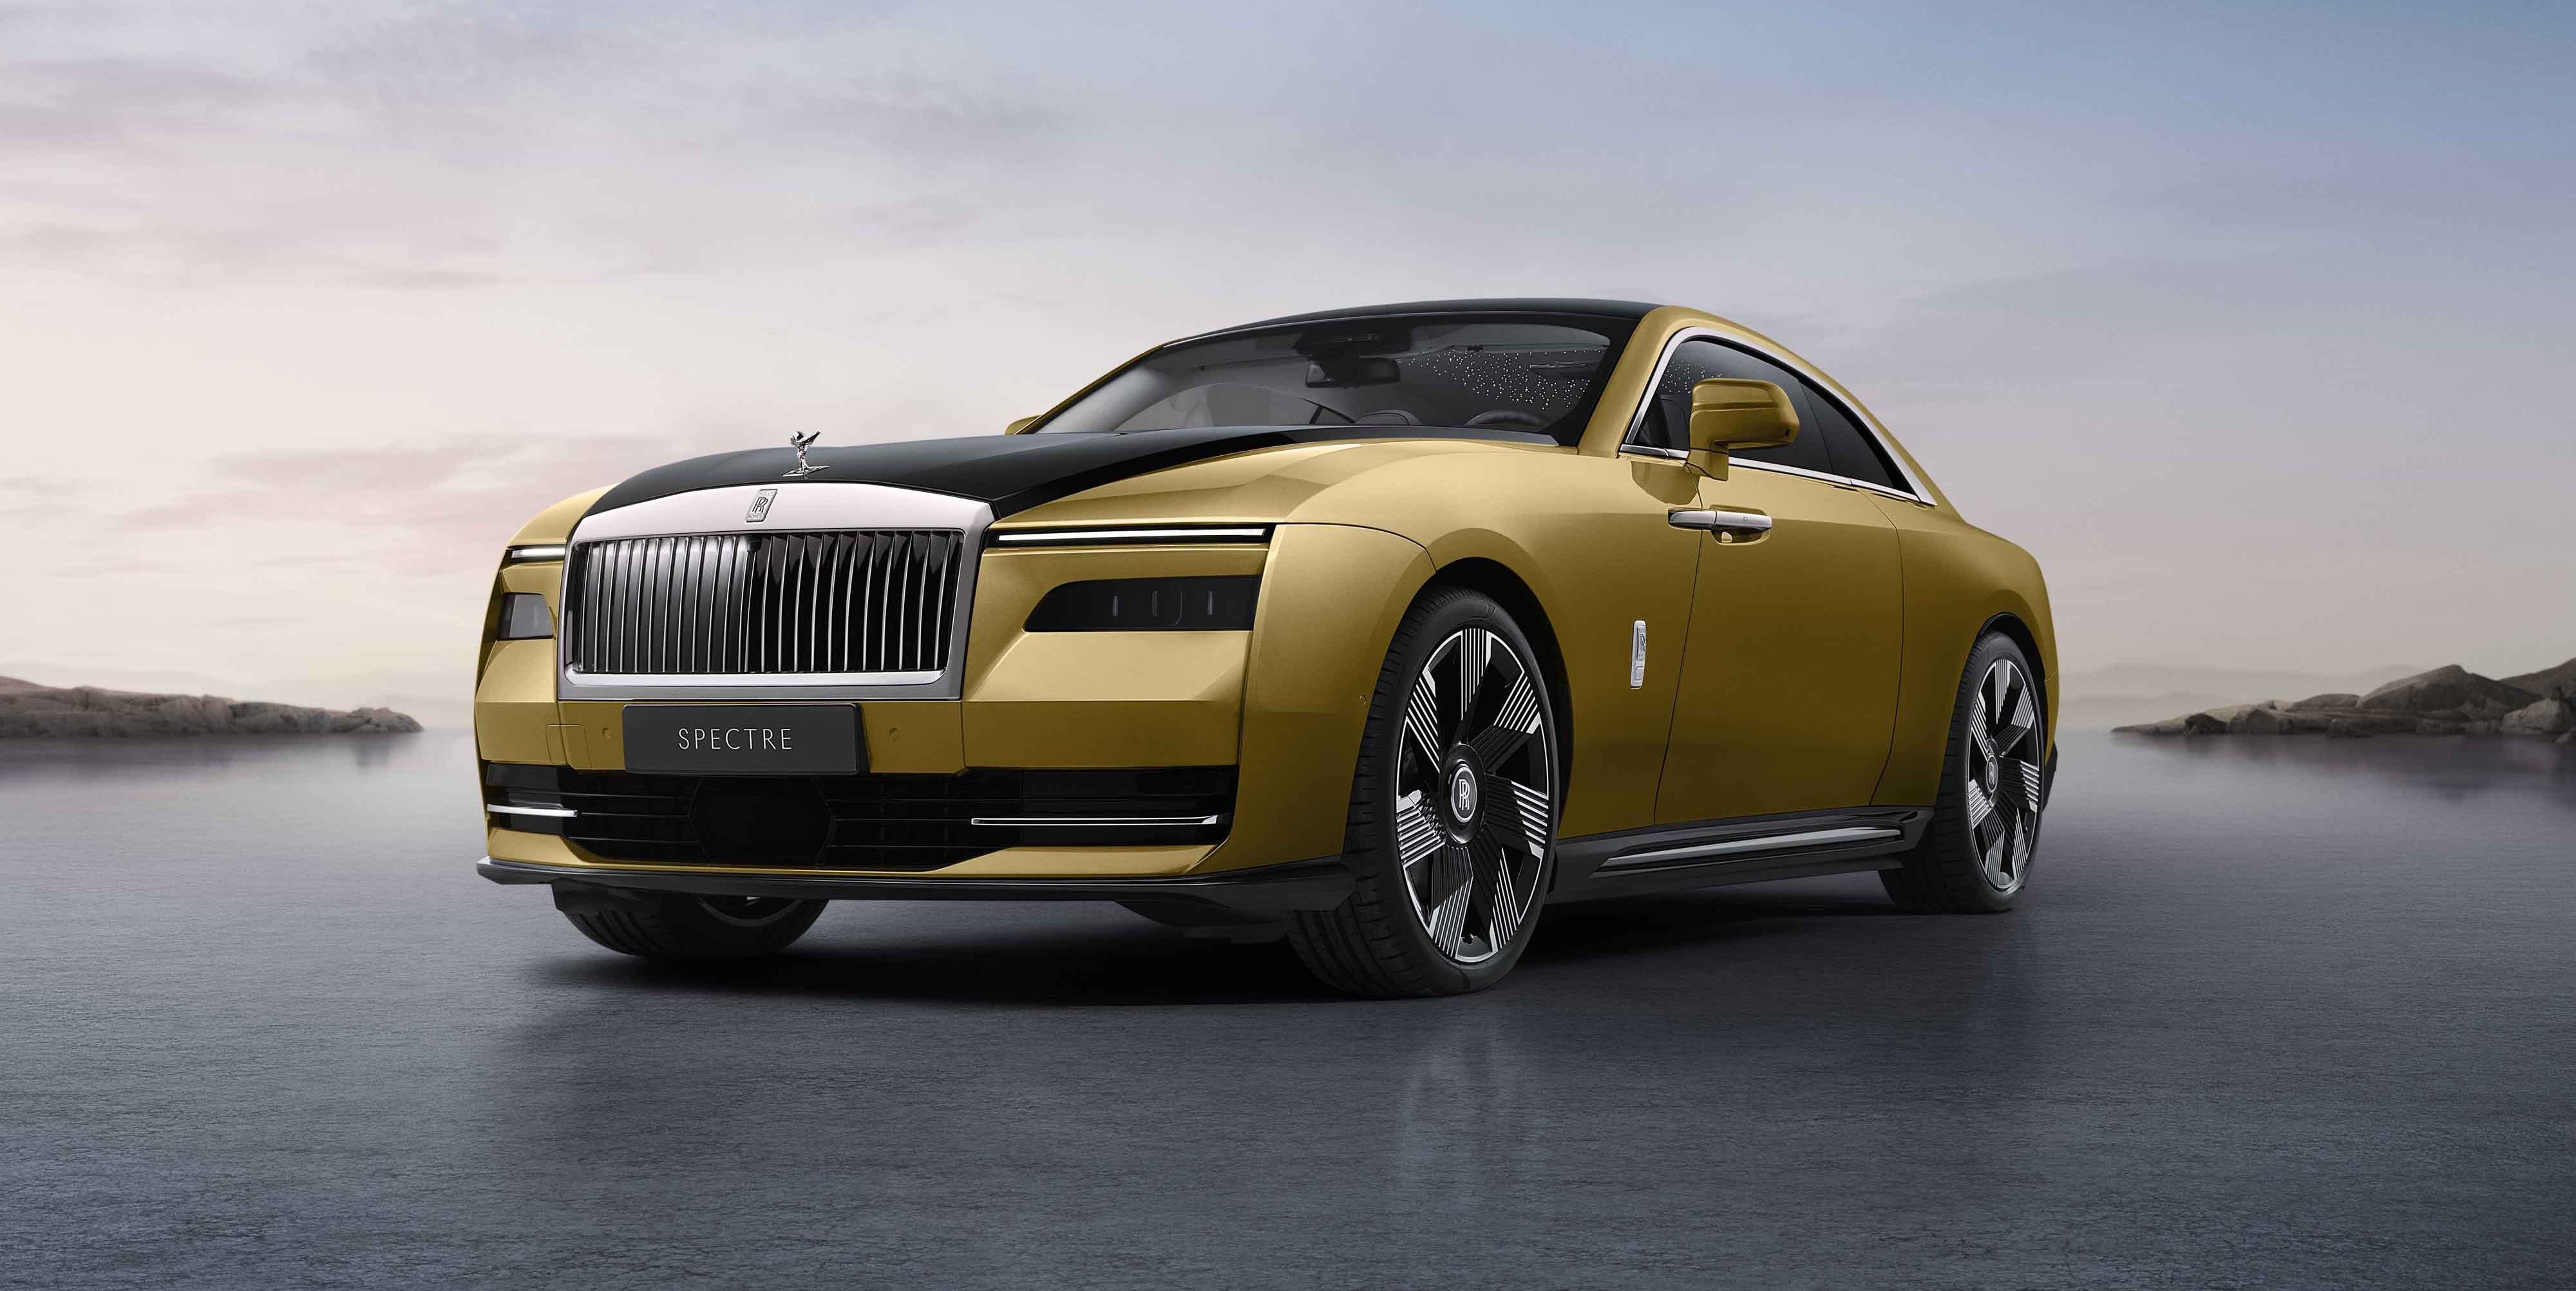 The Rolls-Royce Spectre Is an Enormous, Ultra-Luxury EV Coupe